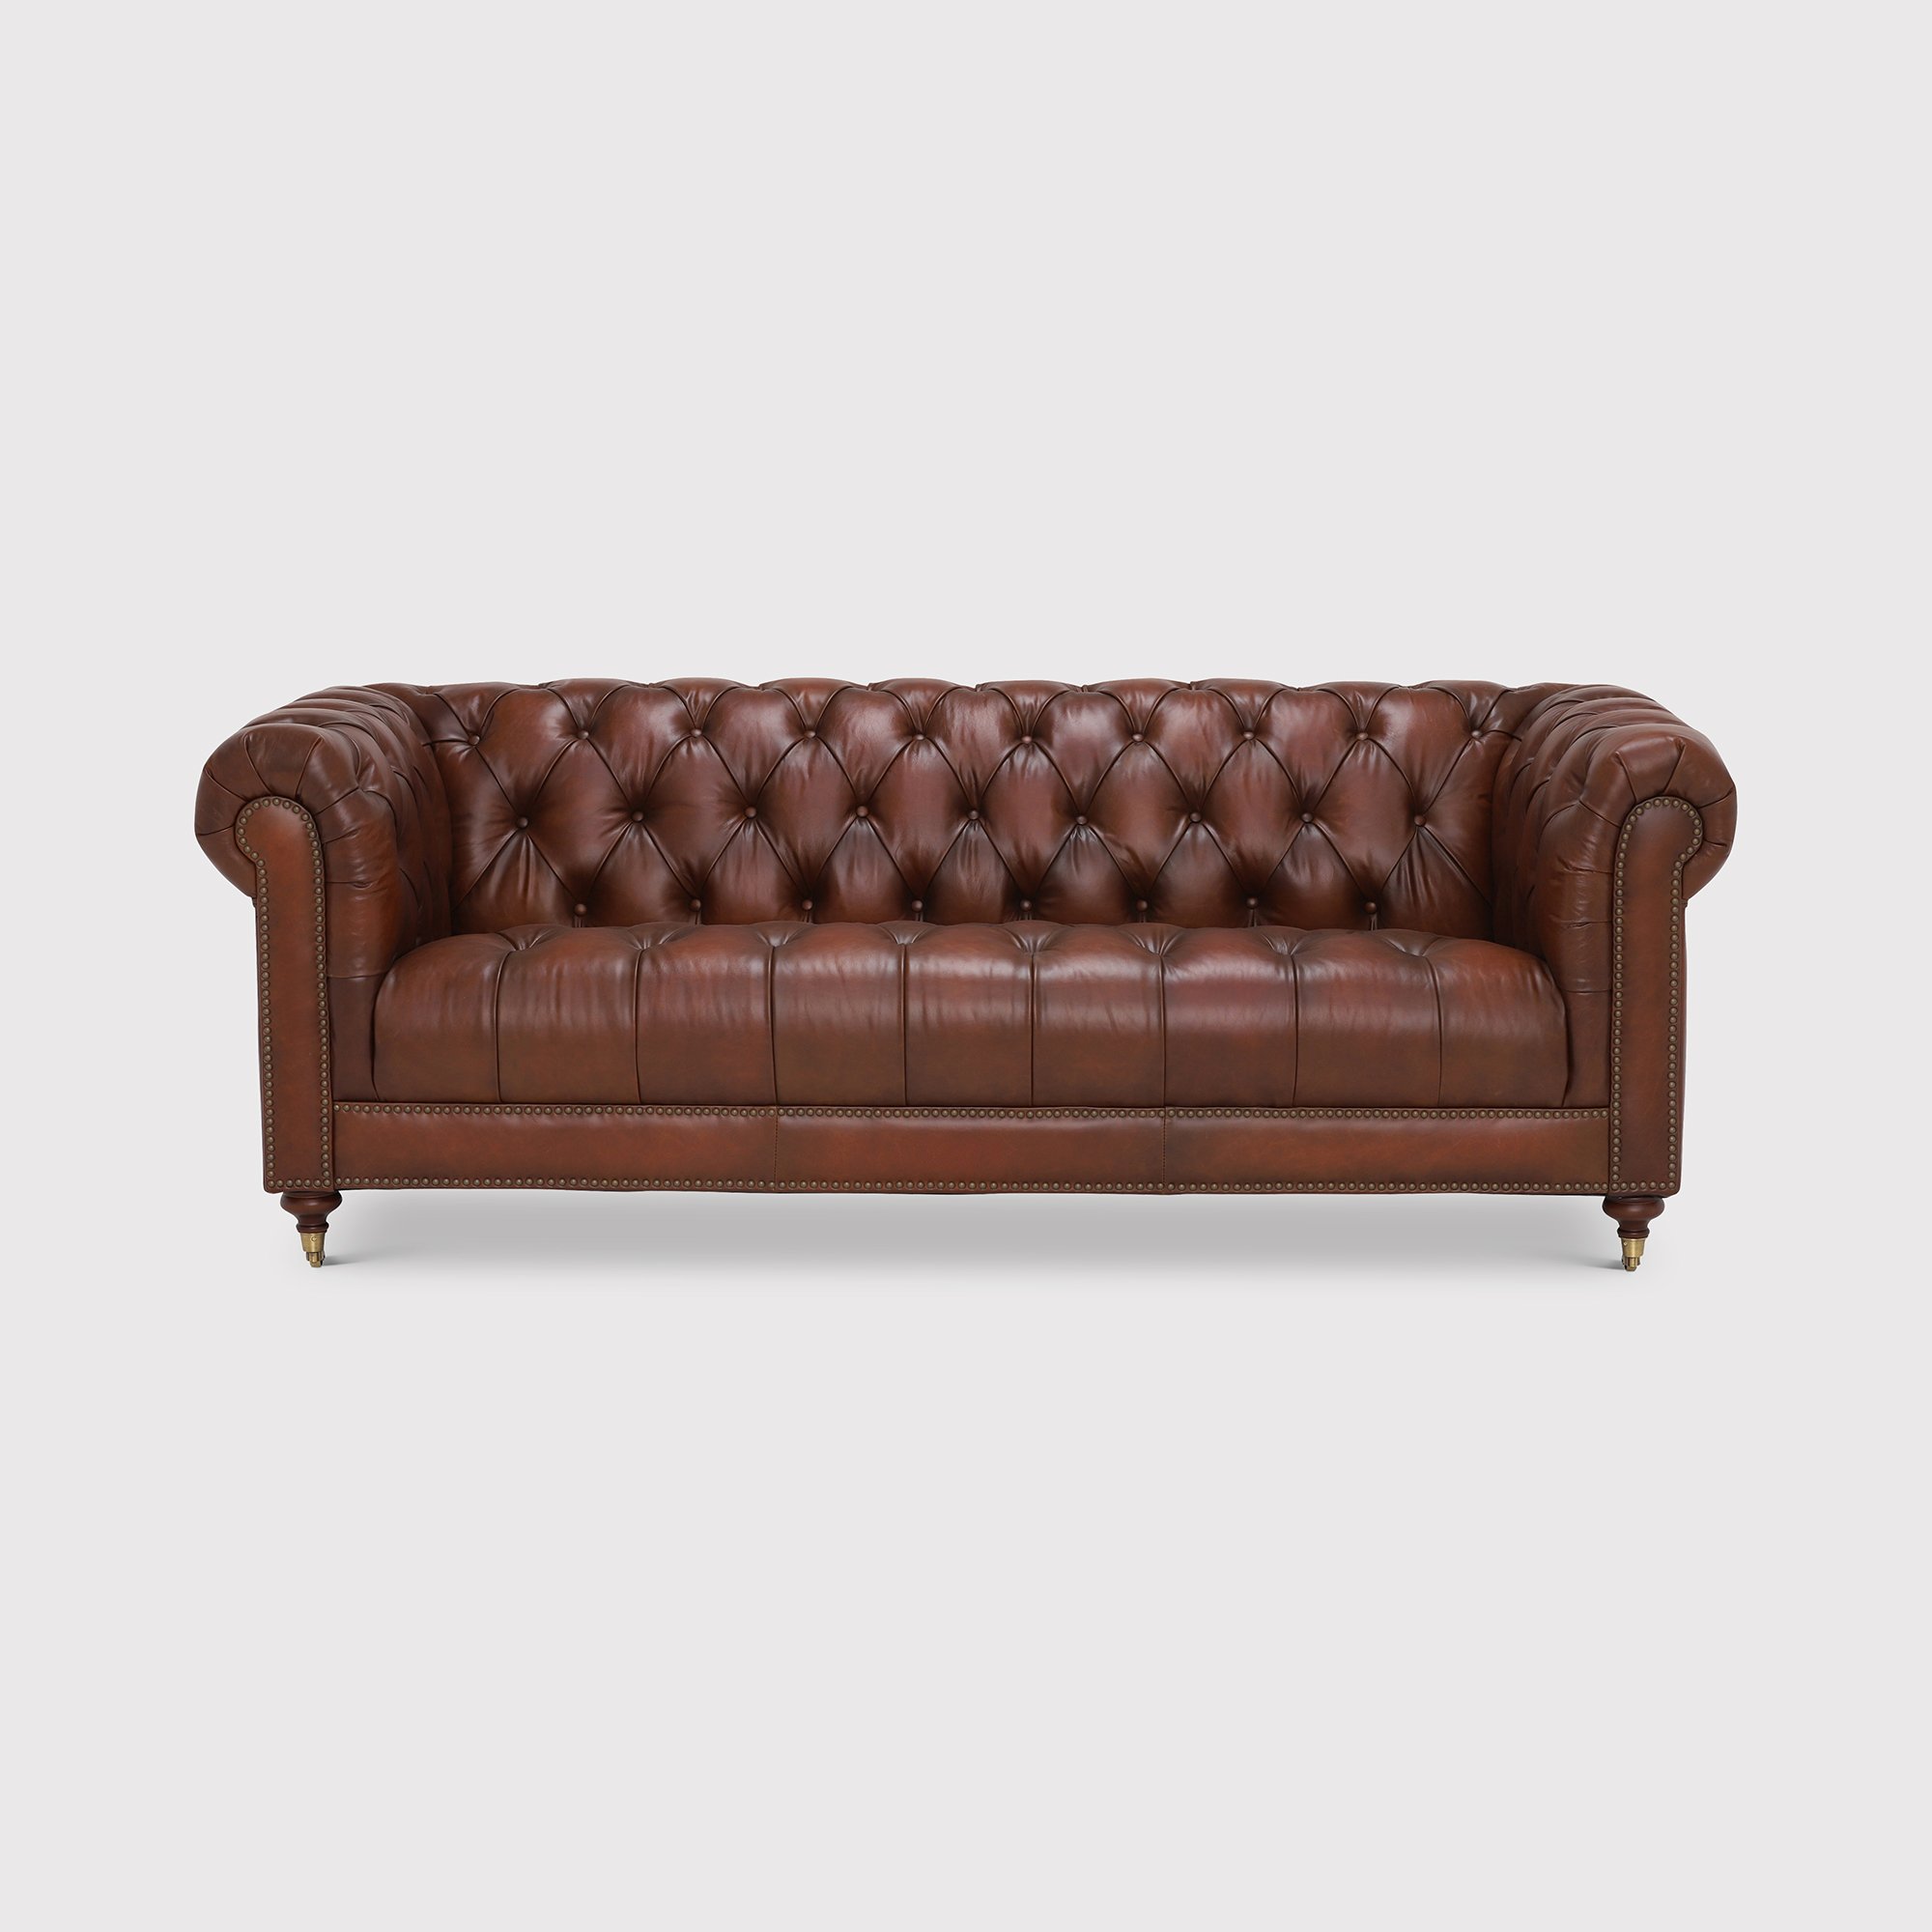 Ullswater 3.5 Seater Leather Chesterfield Sofa, Brown | Barker & Stonehouse